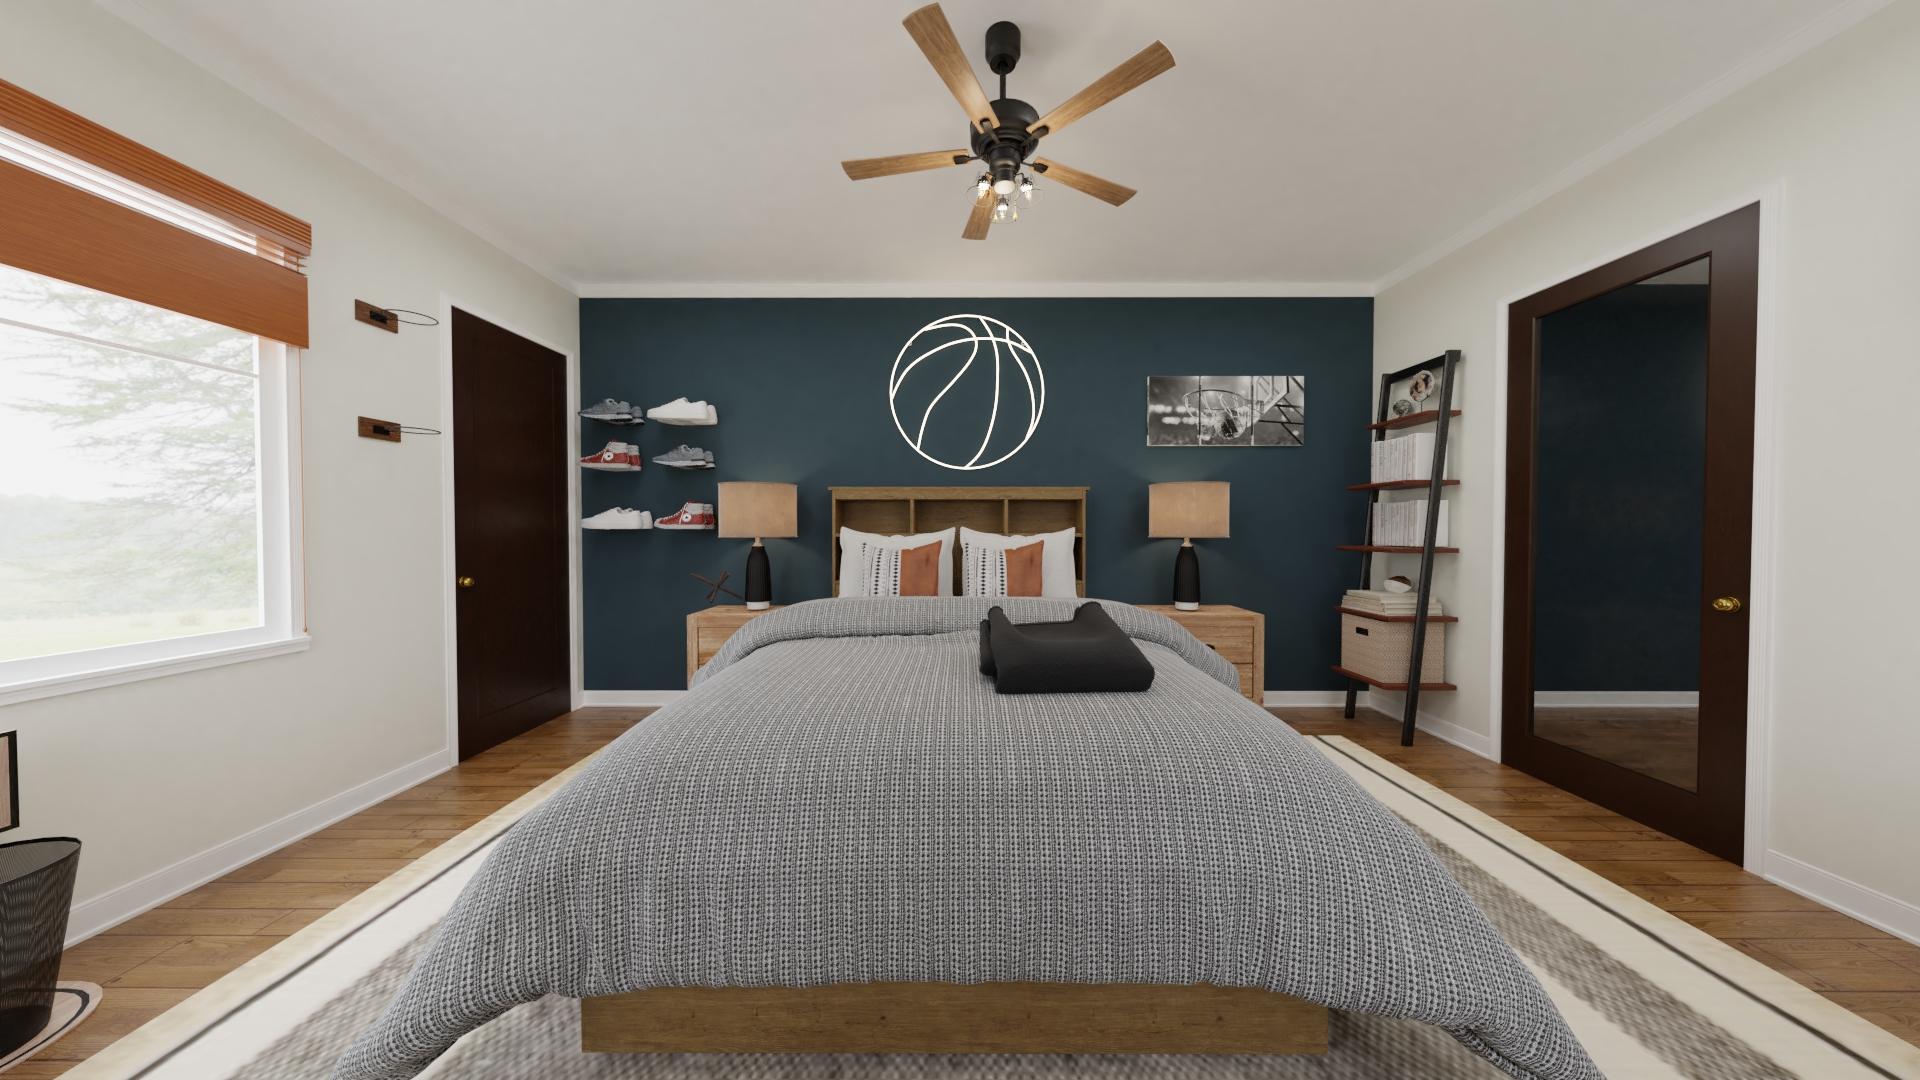 Rustic Industrial Bedroom with a Basketball Theme